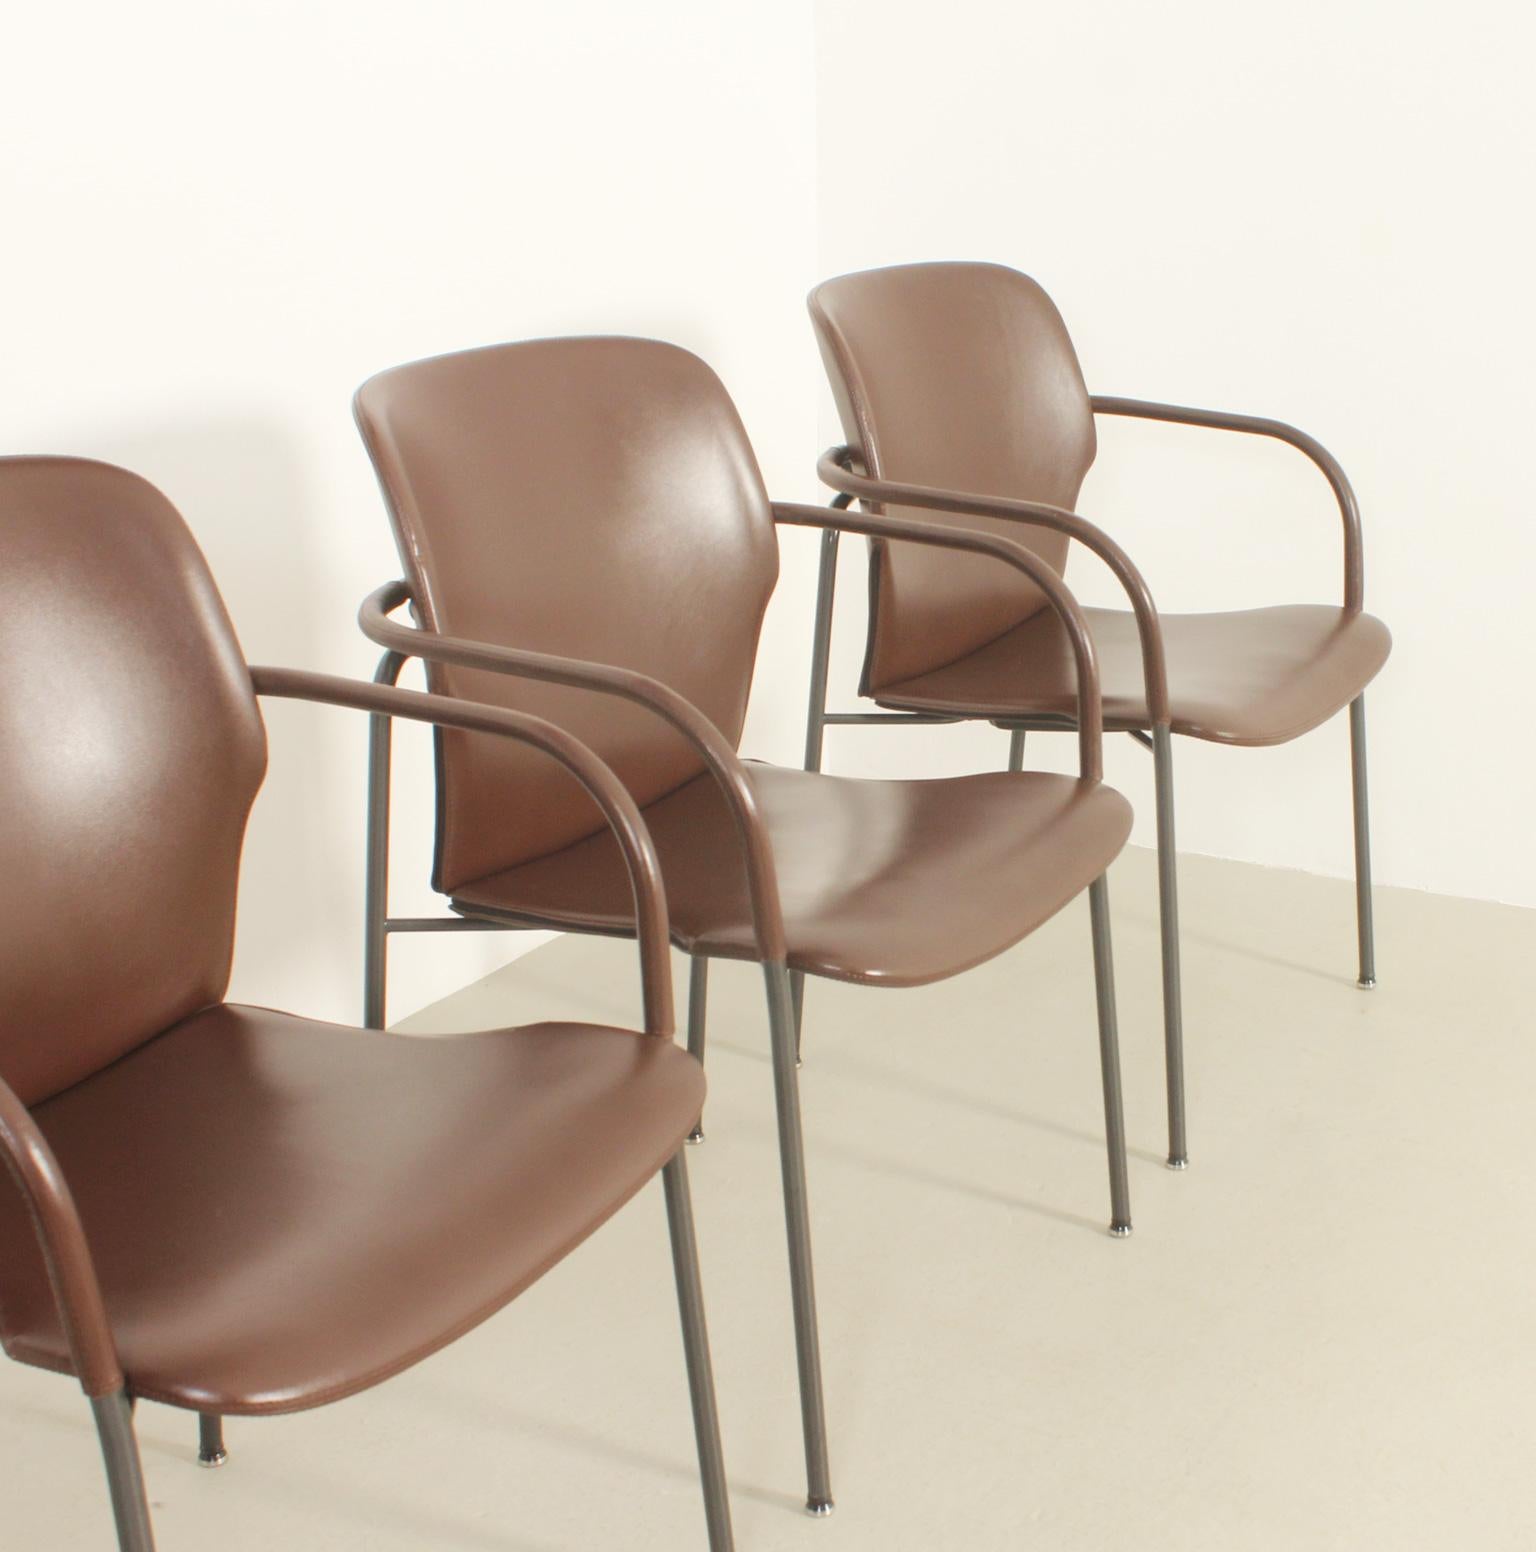 Late 20th Century Four Leather Lalanda Chairs by Gianfranco Frattini, 1980's For Sale